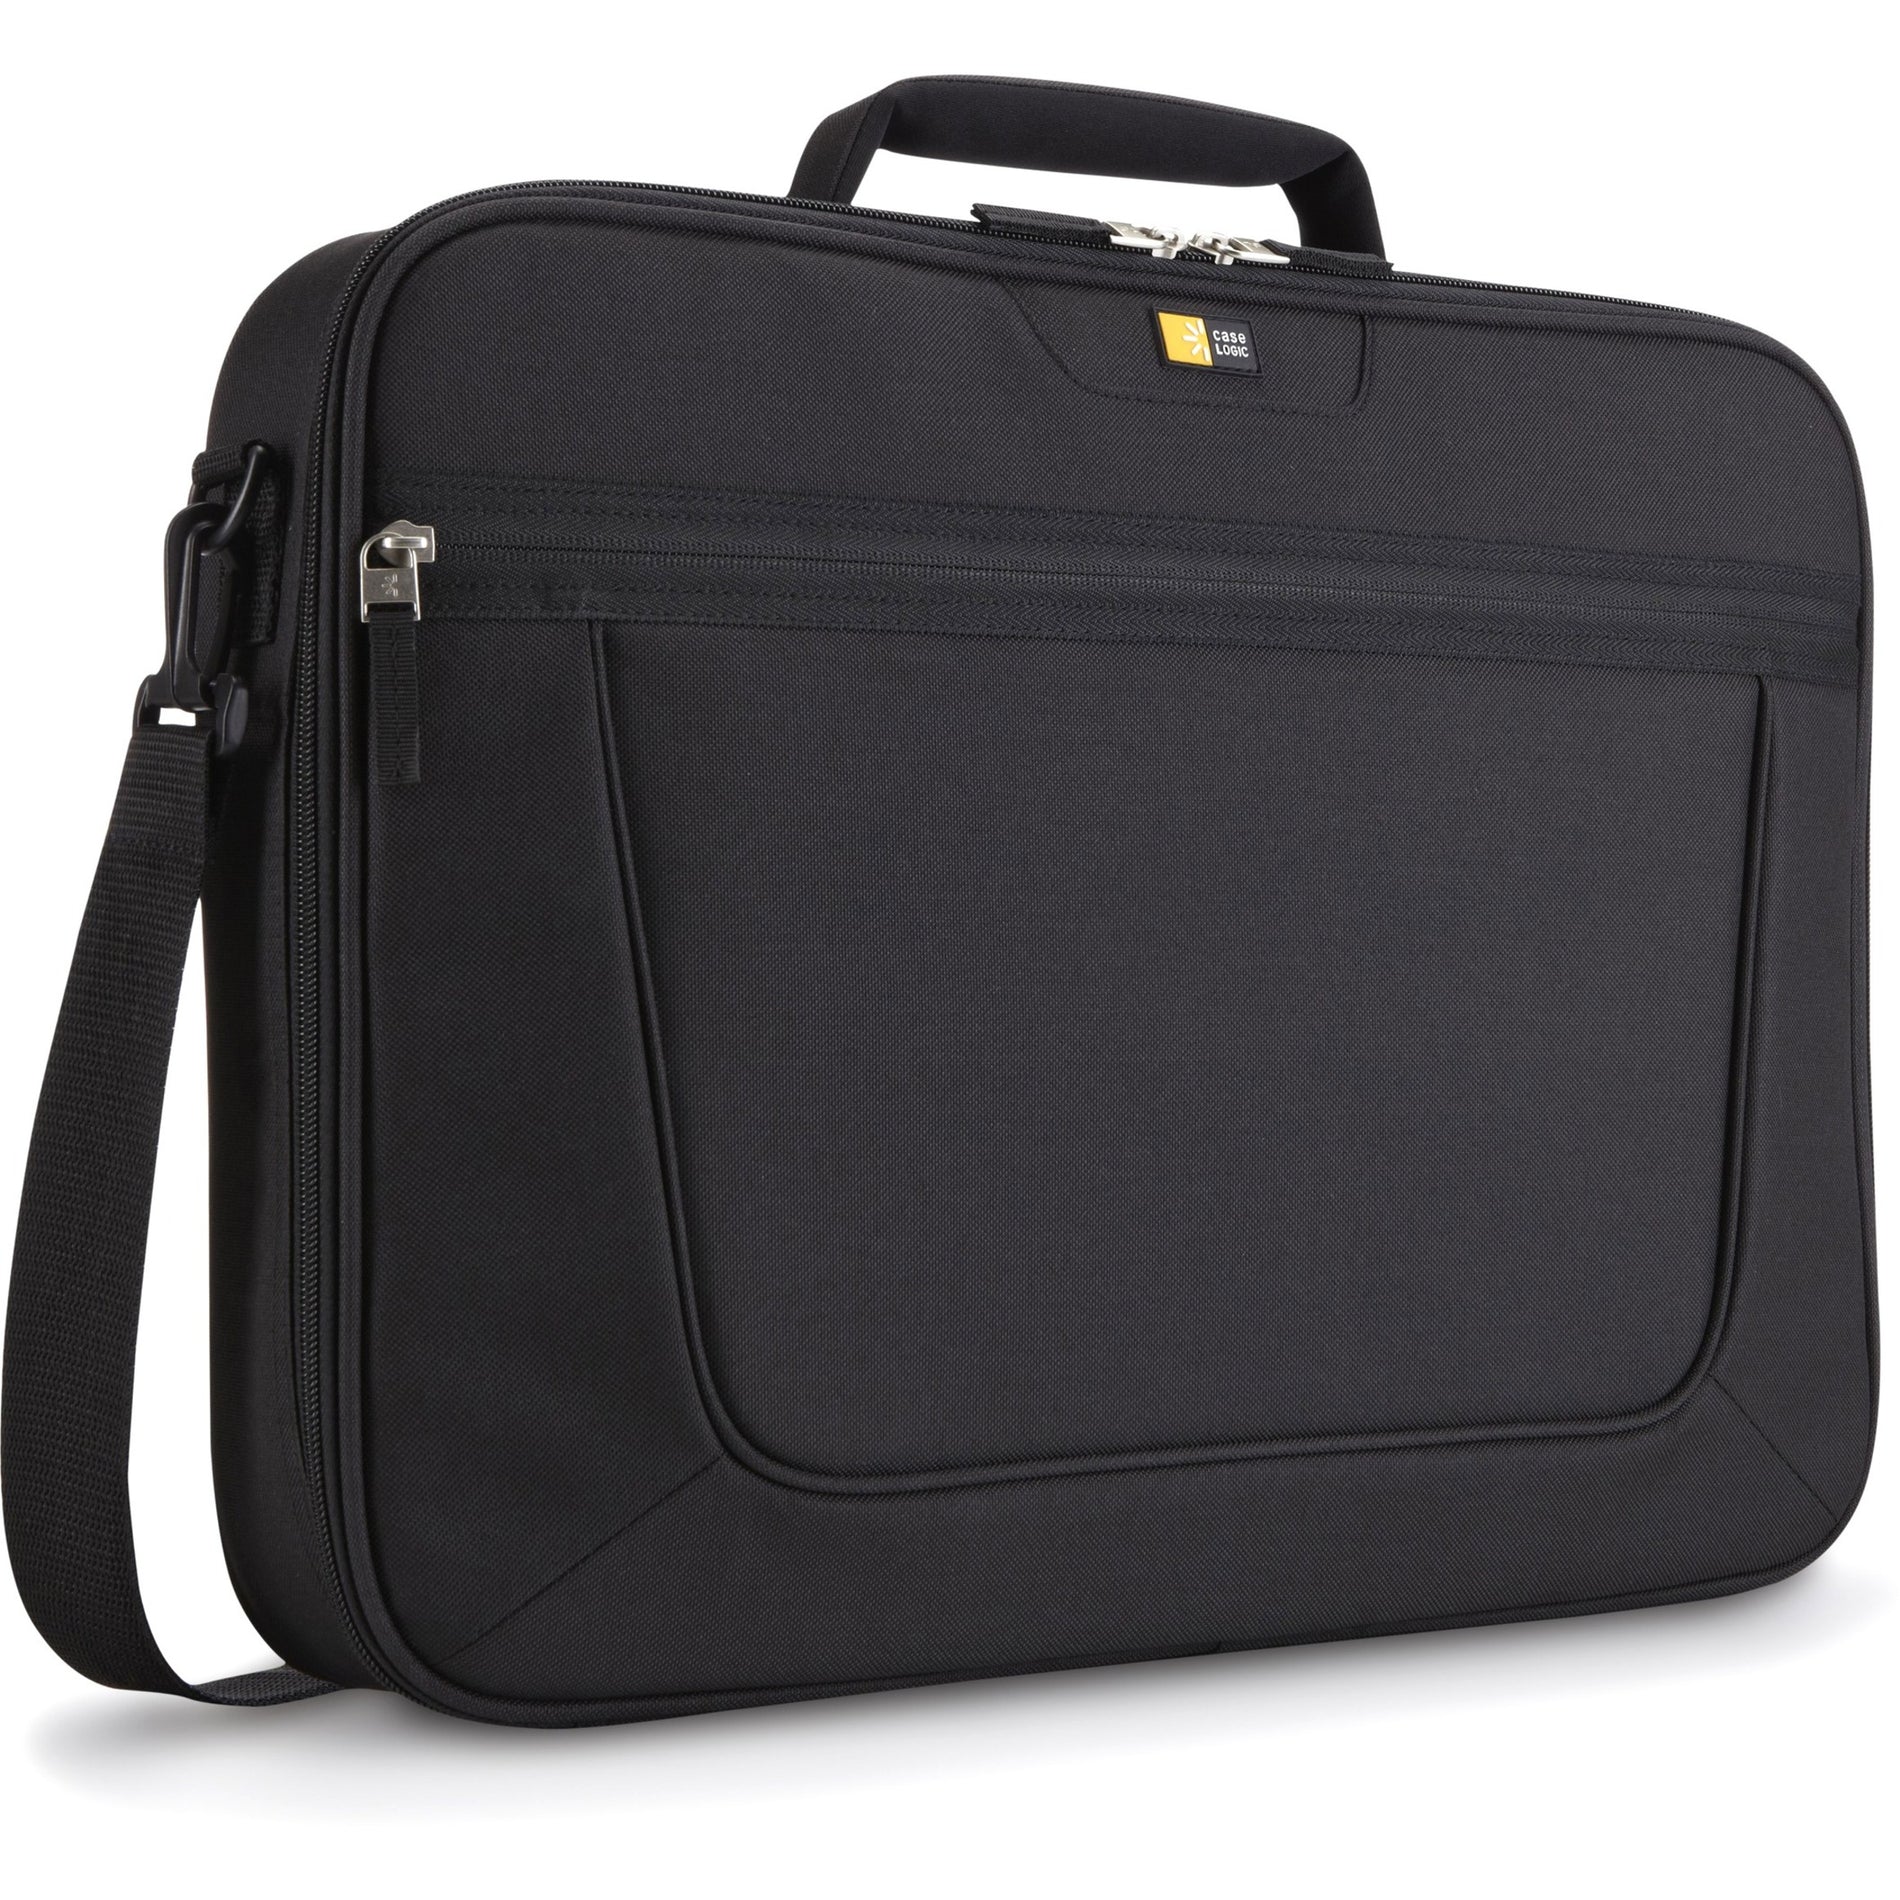 Case Logic Carrying Case for 17.3" Notebook - Black (3201490) Main image